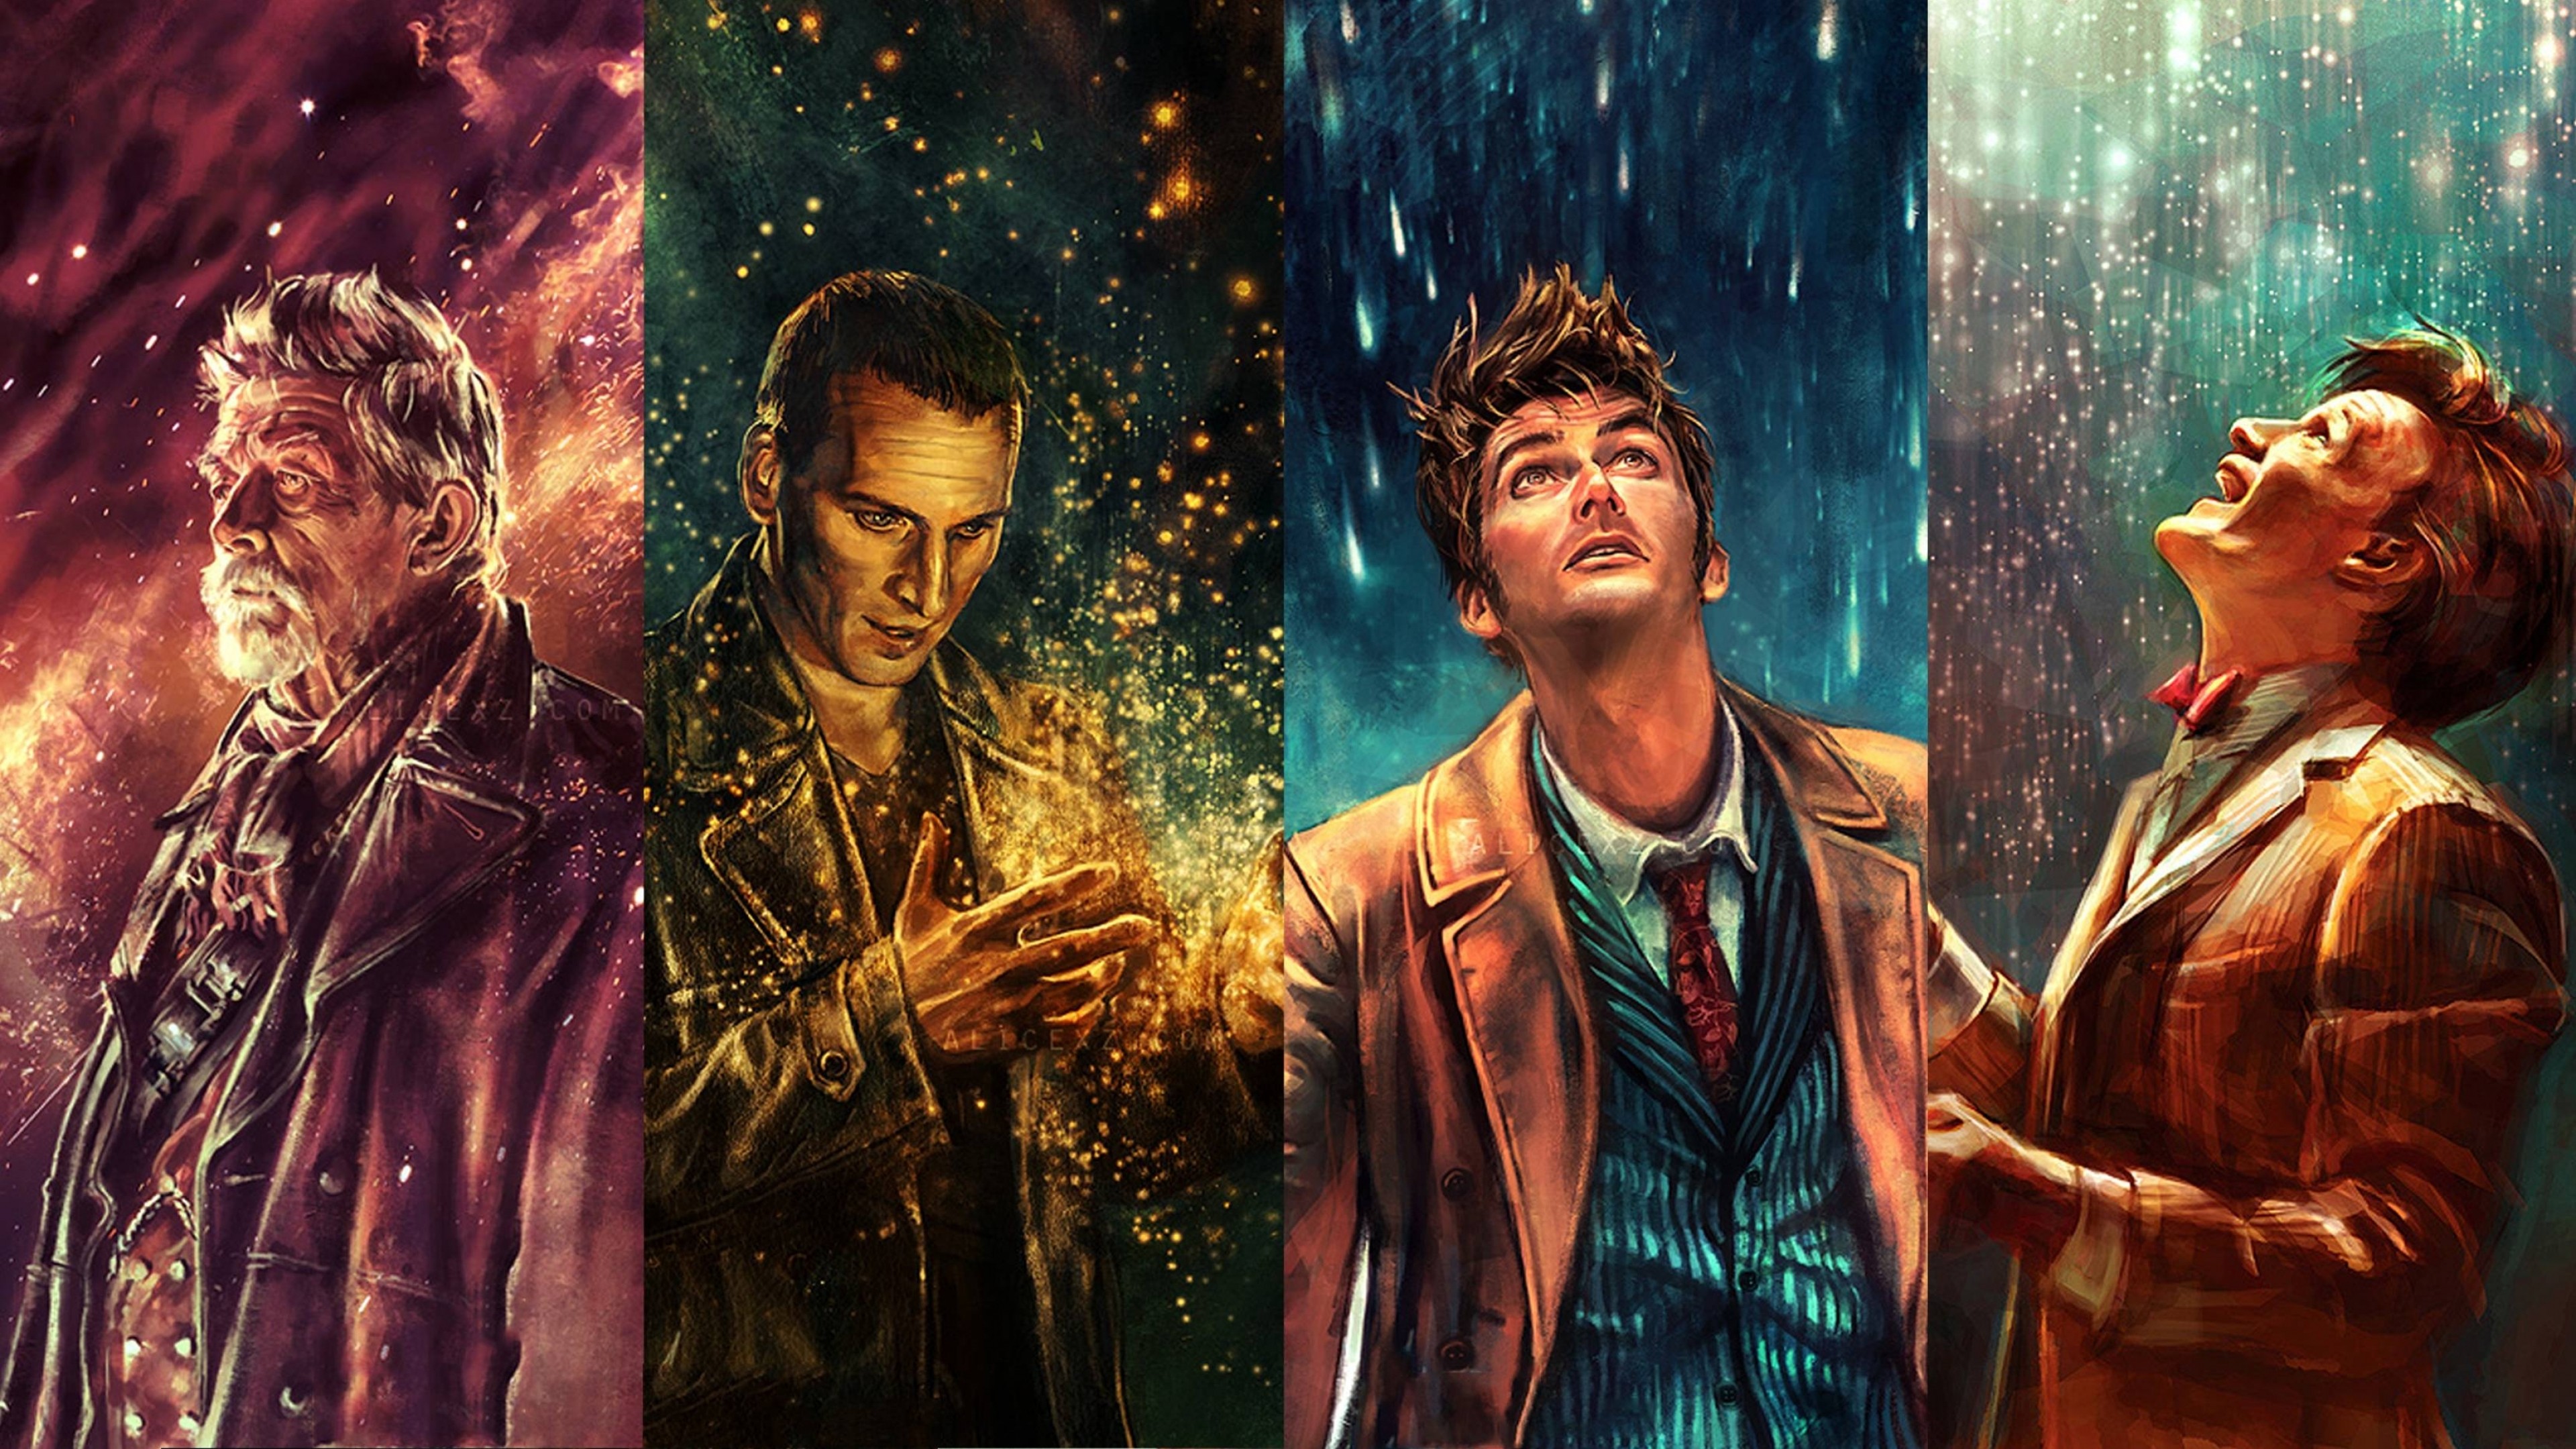 Doctor Who The Doctor War Doctor Ninth Doctor Tenth Doctor Eleventh Doctor Hellblazer Christopher Ec 3840x2160